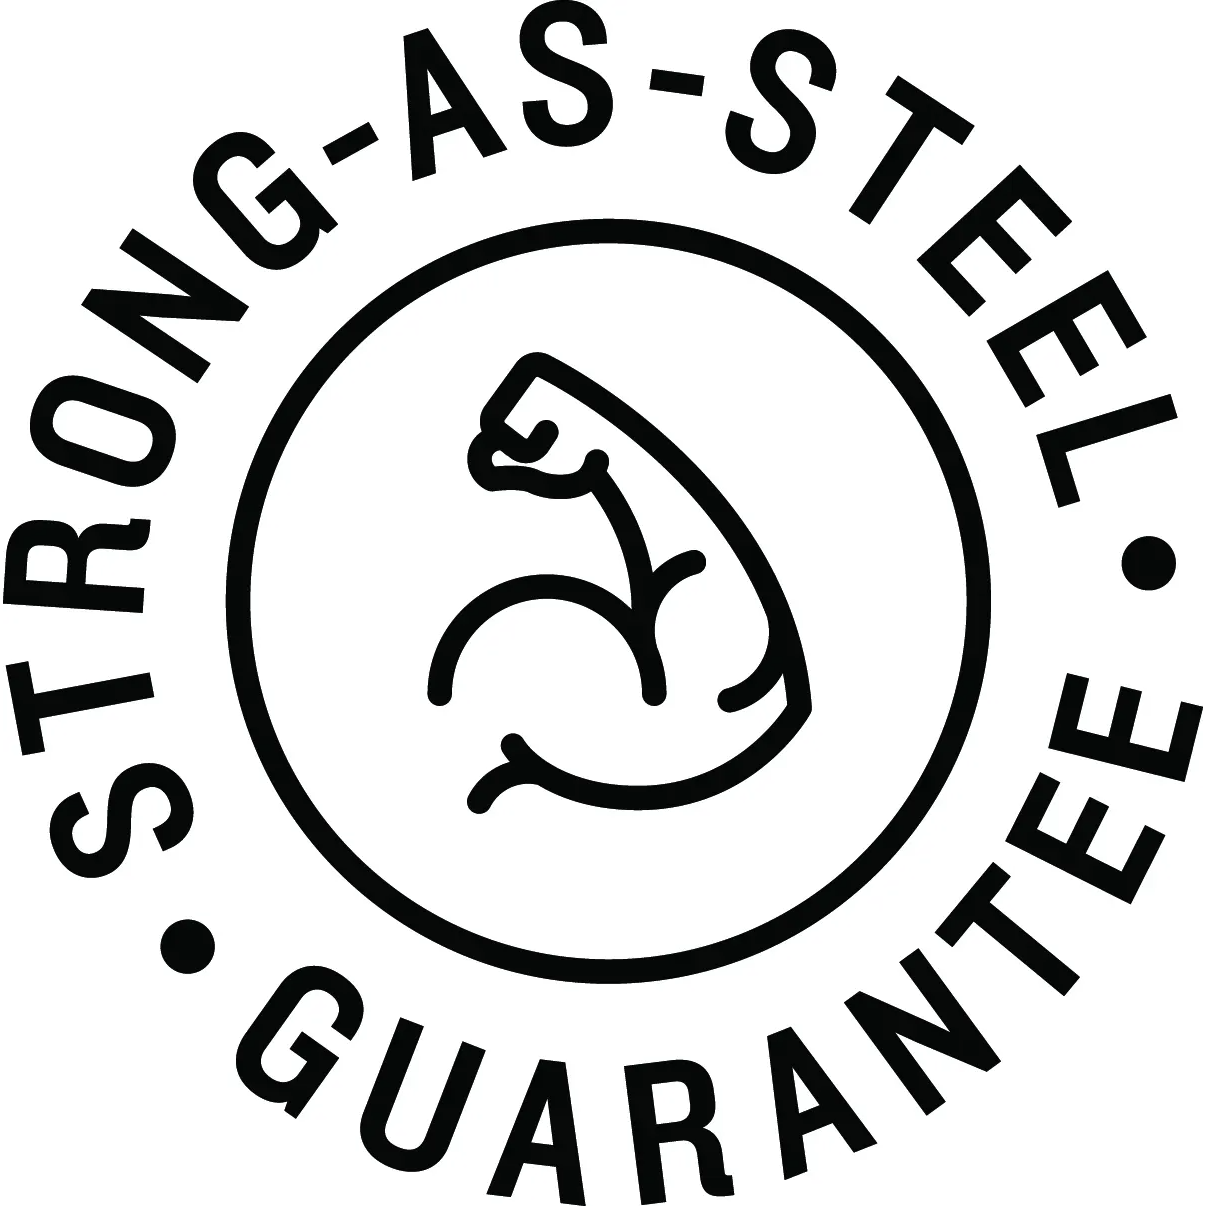 strong as steel guarantee icon